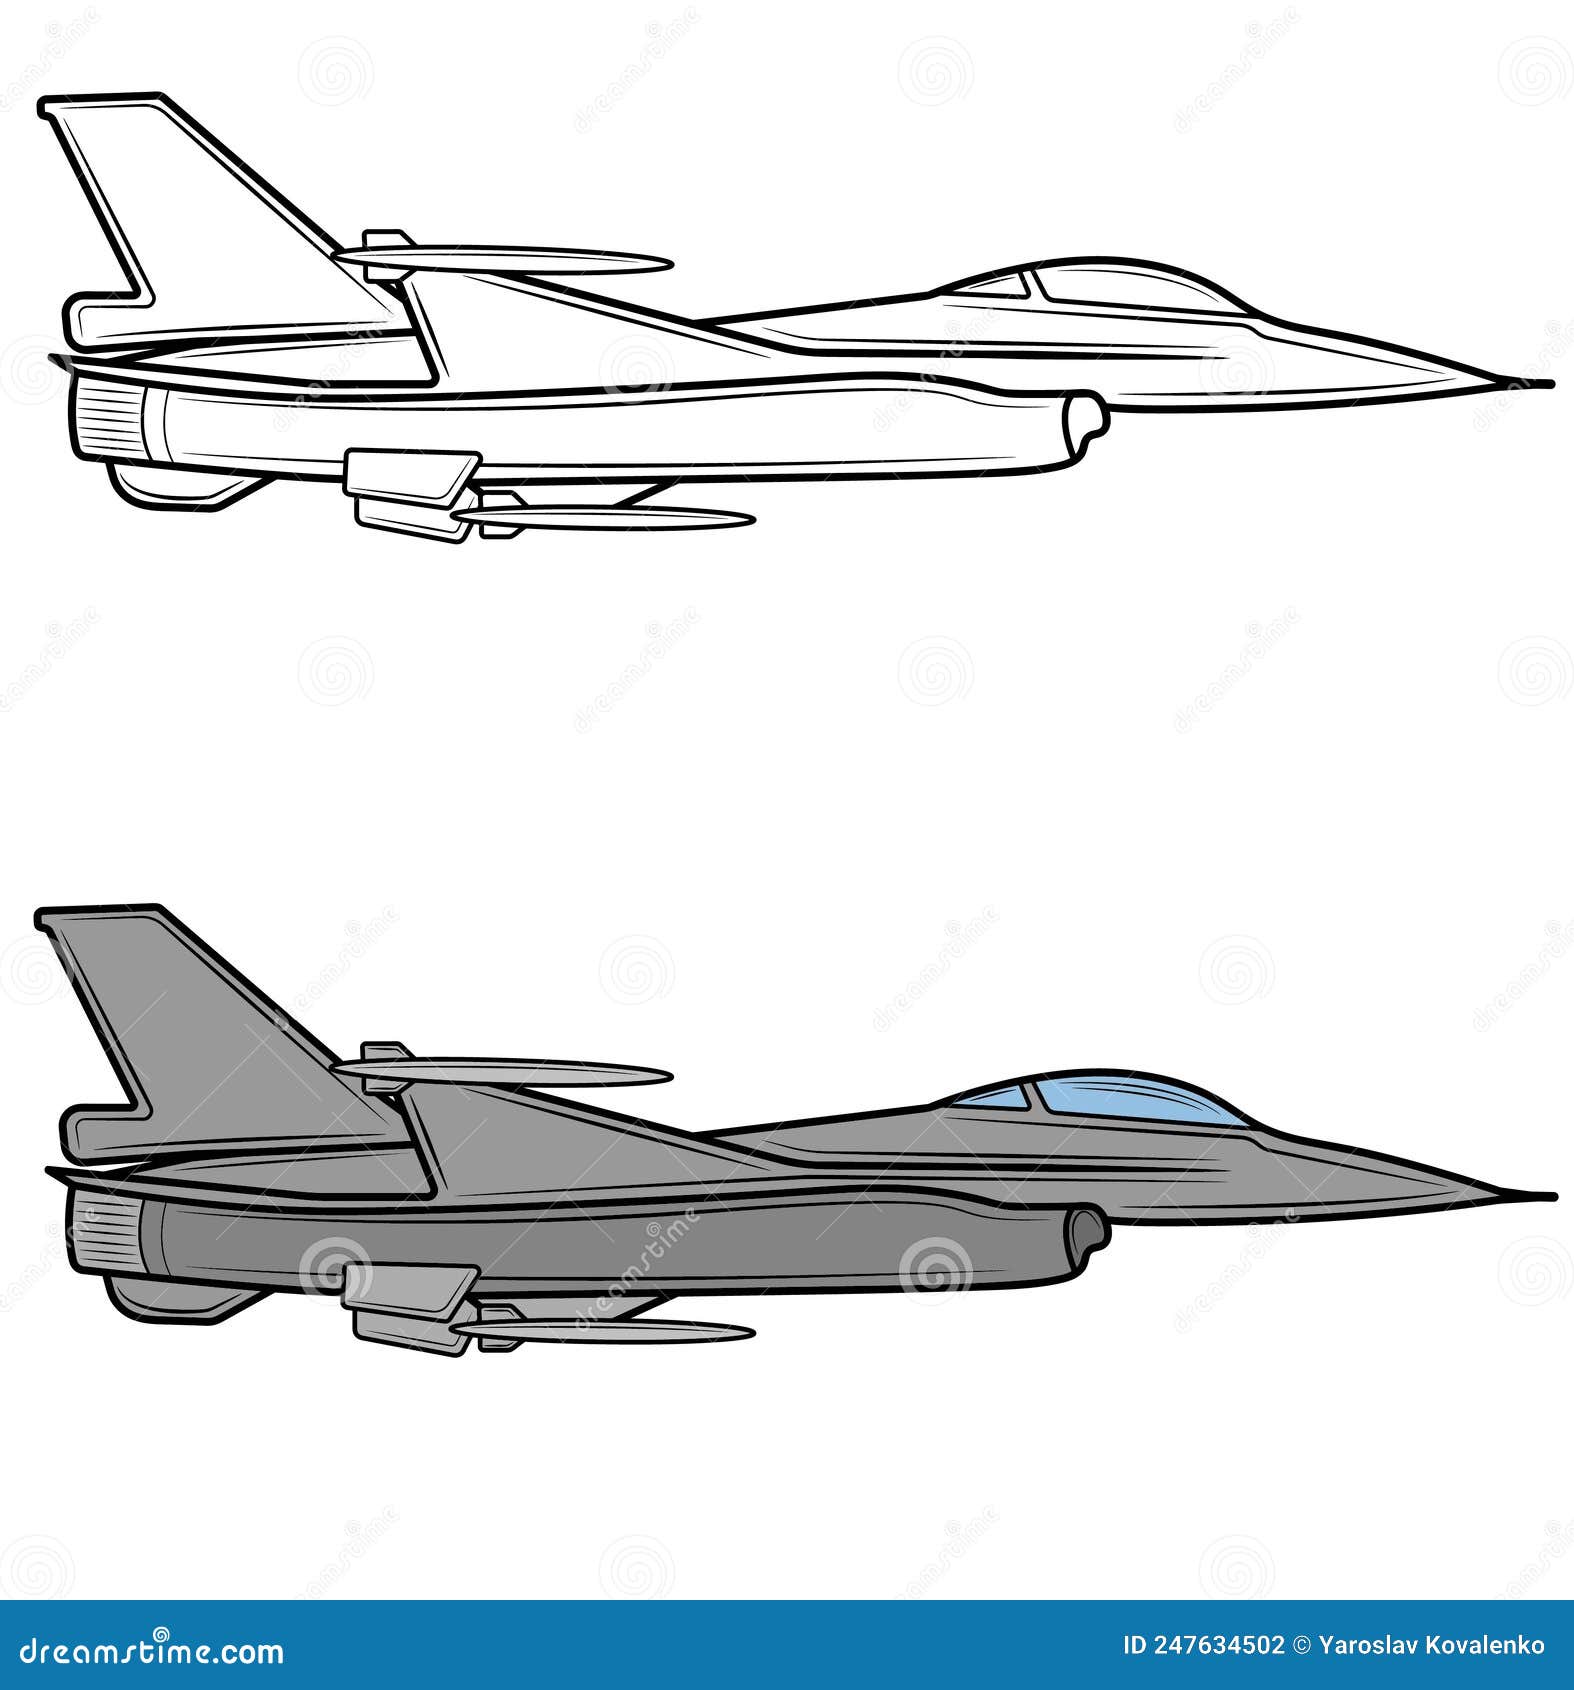 Drawing Art Of Fighter Plane Royalty-Free Stock Image - Storyblocks